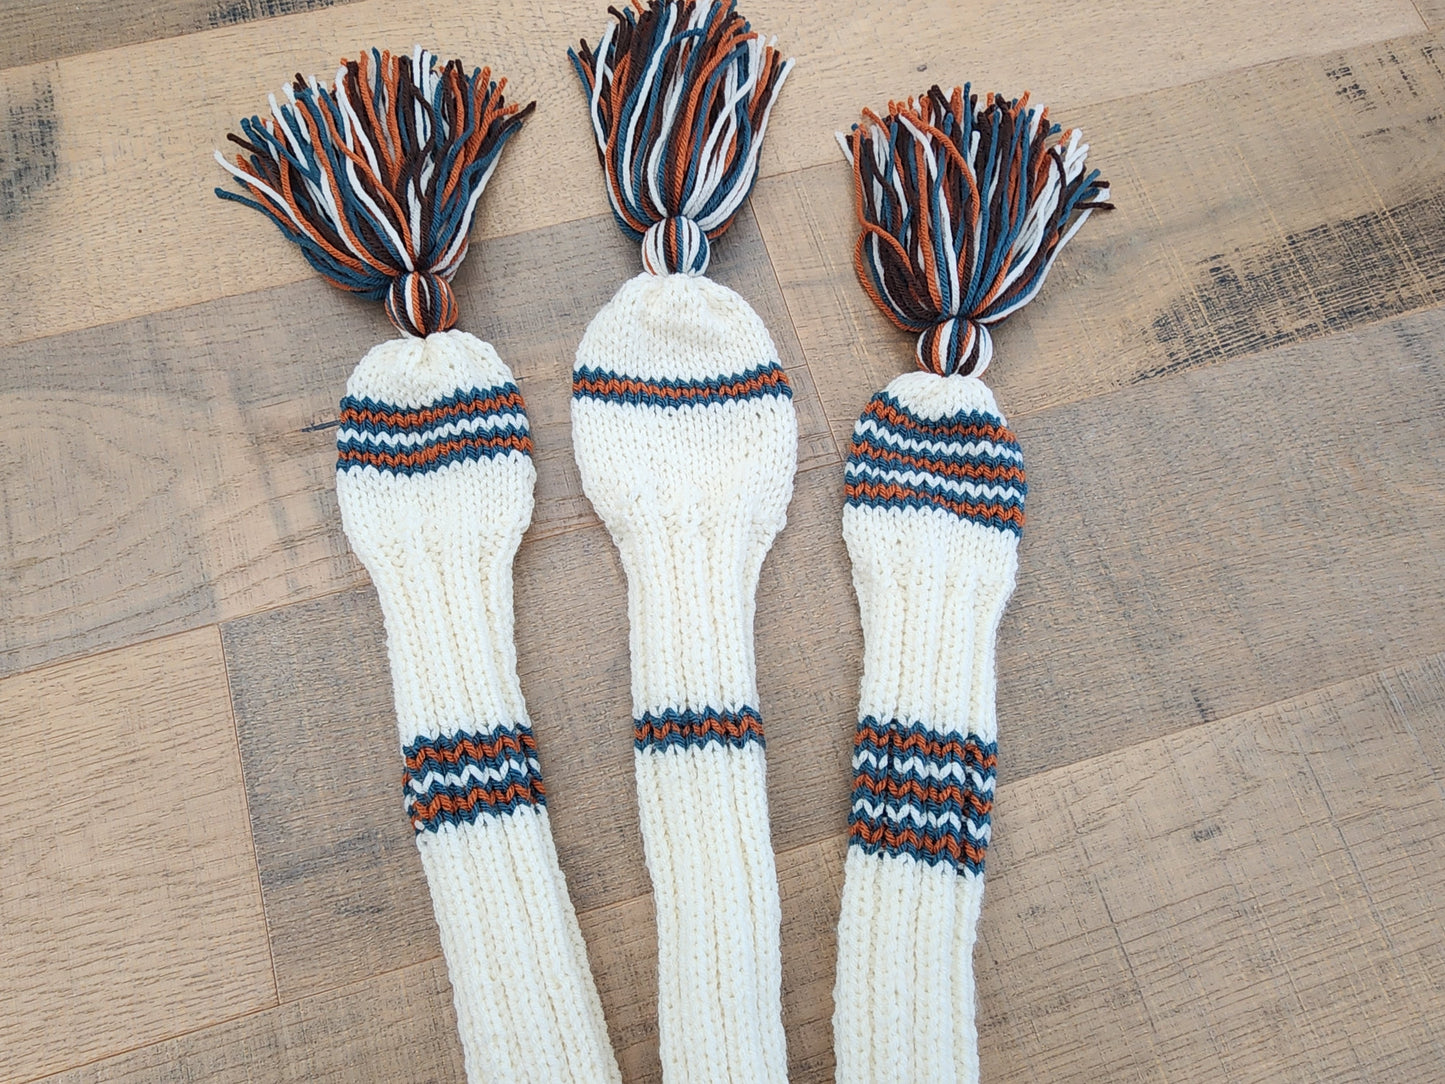 Three Golf Club Head Covers Retro-Vintage Ivory, Dark Teal & Orange with Tassels for Drivers, Woods for Randy